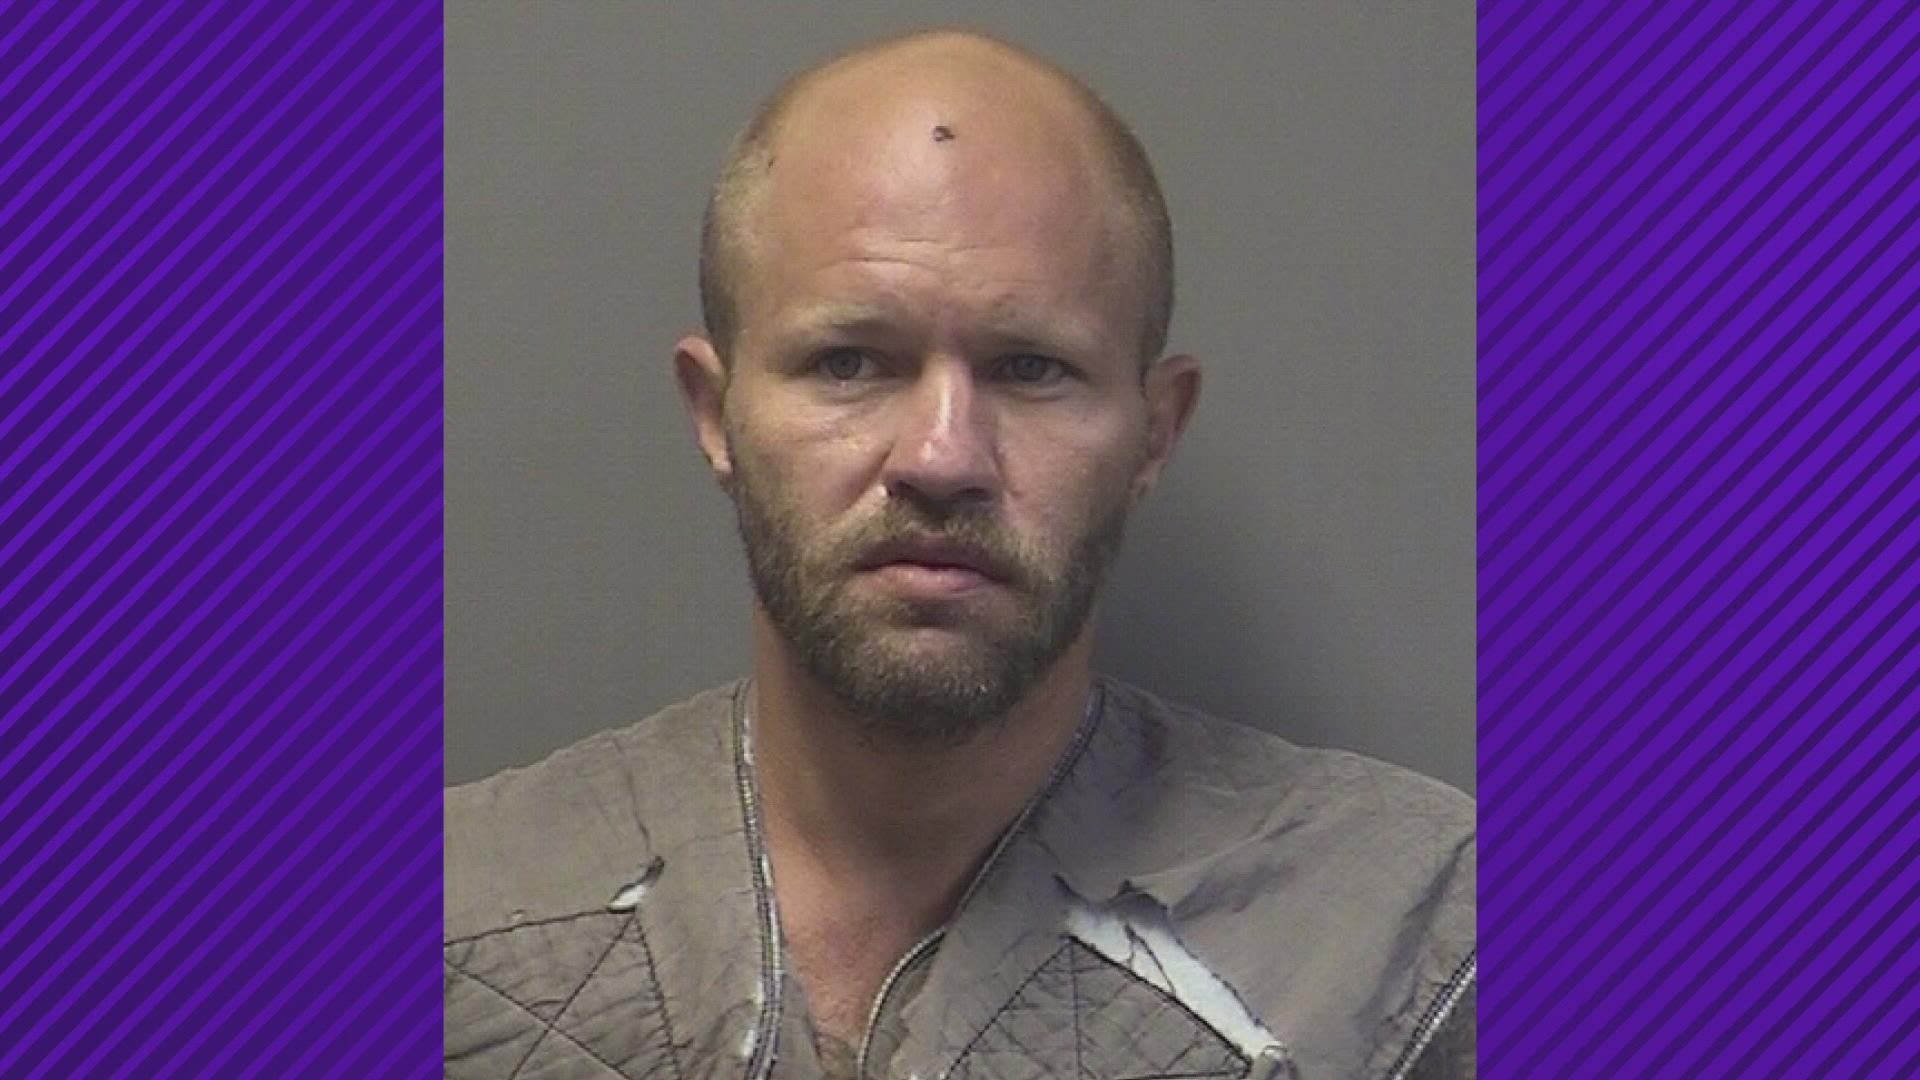 Brandon Hogan is described as a white male, 5'9," 158 lbs. with balding light brown or blonde hair.